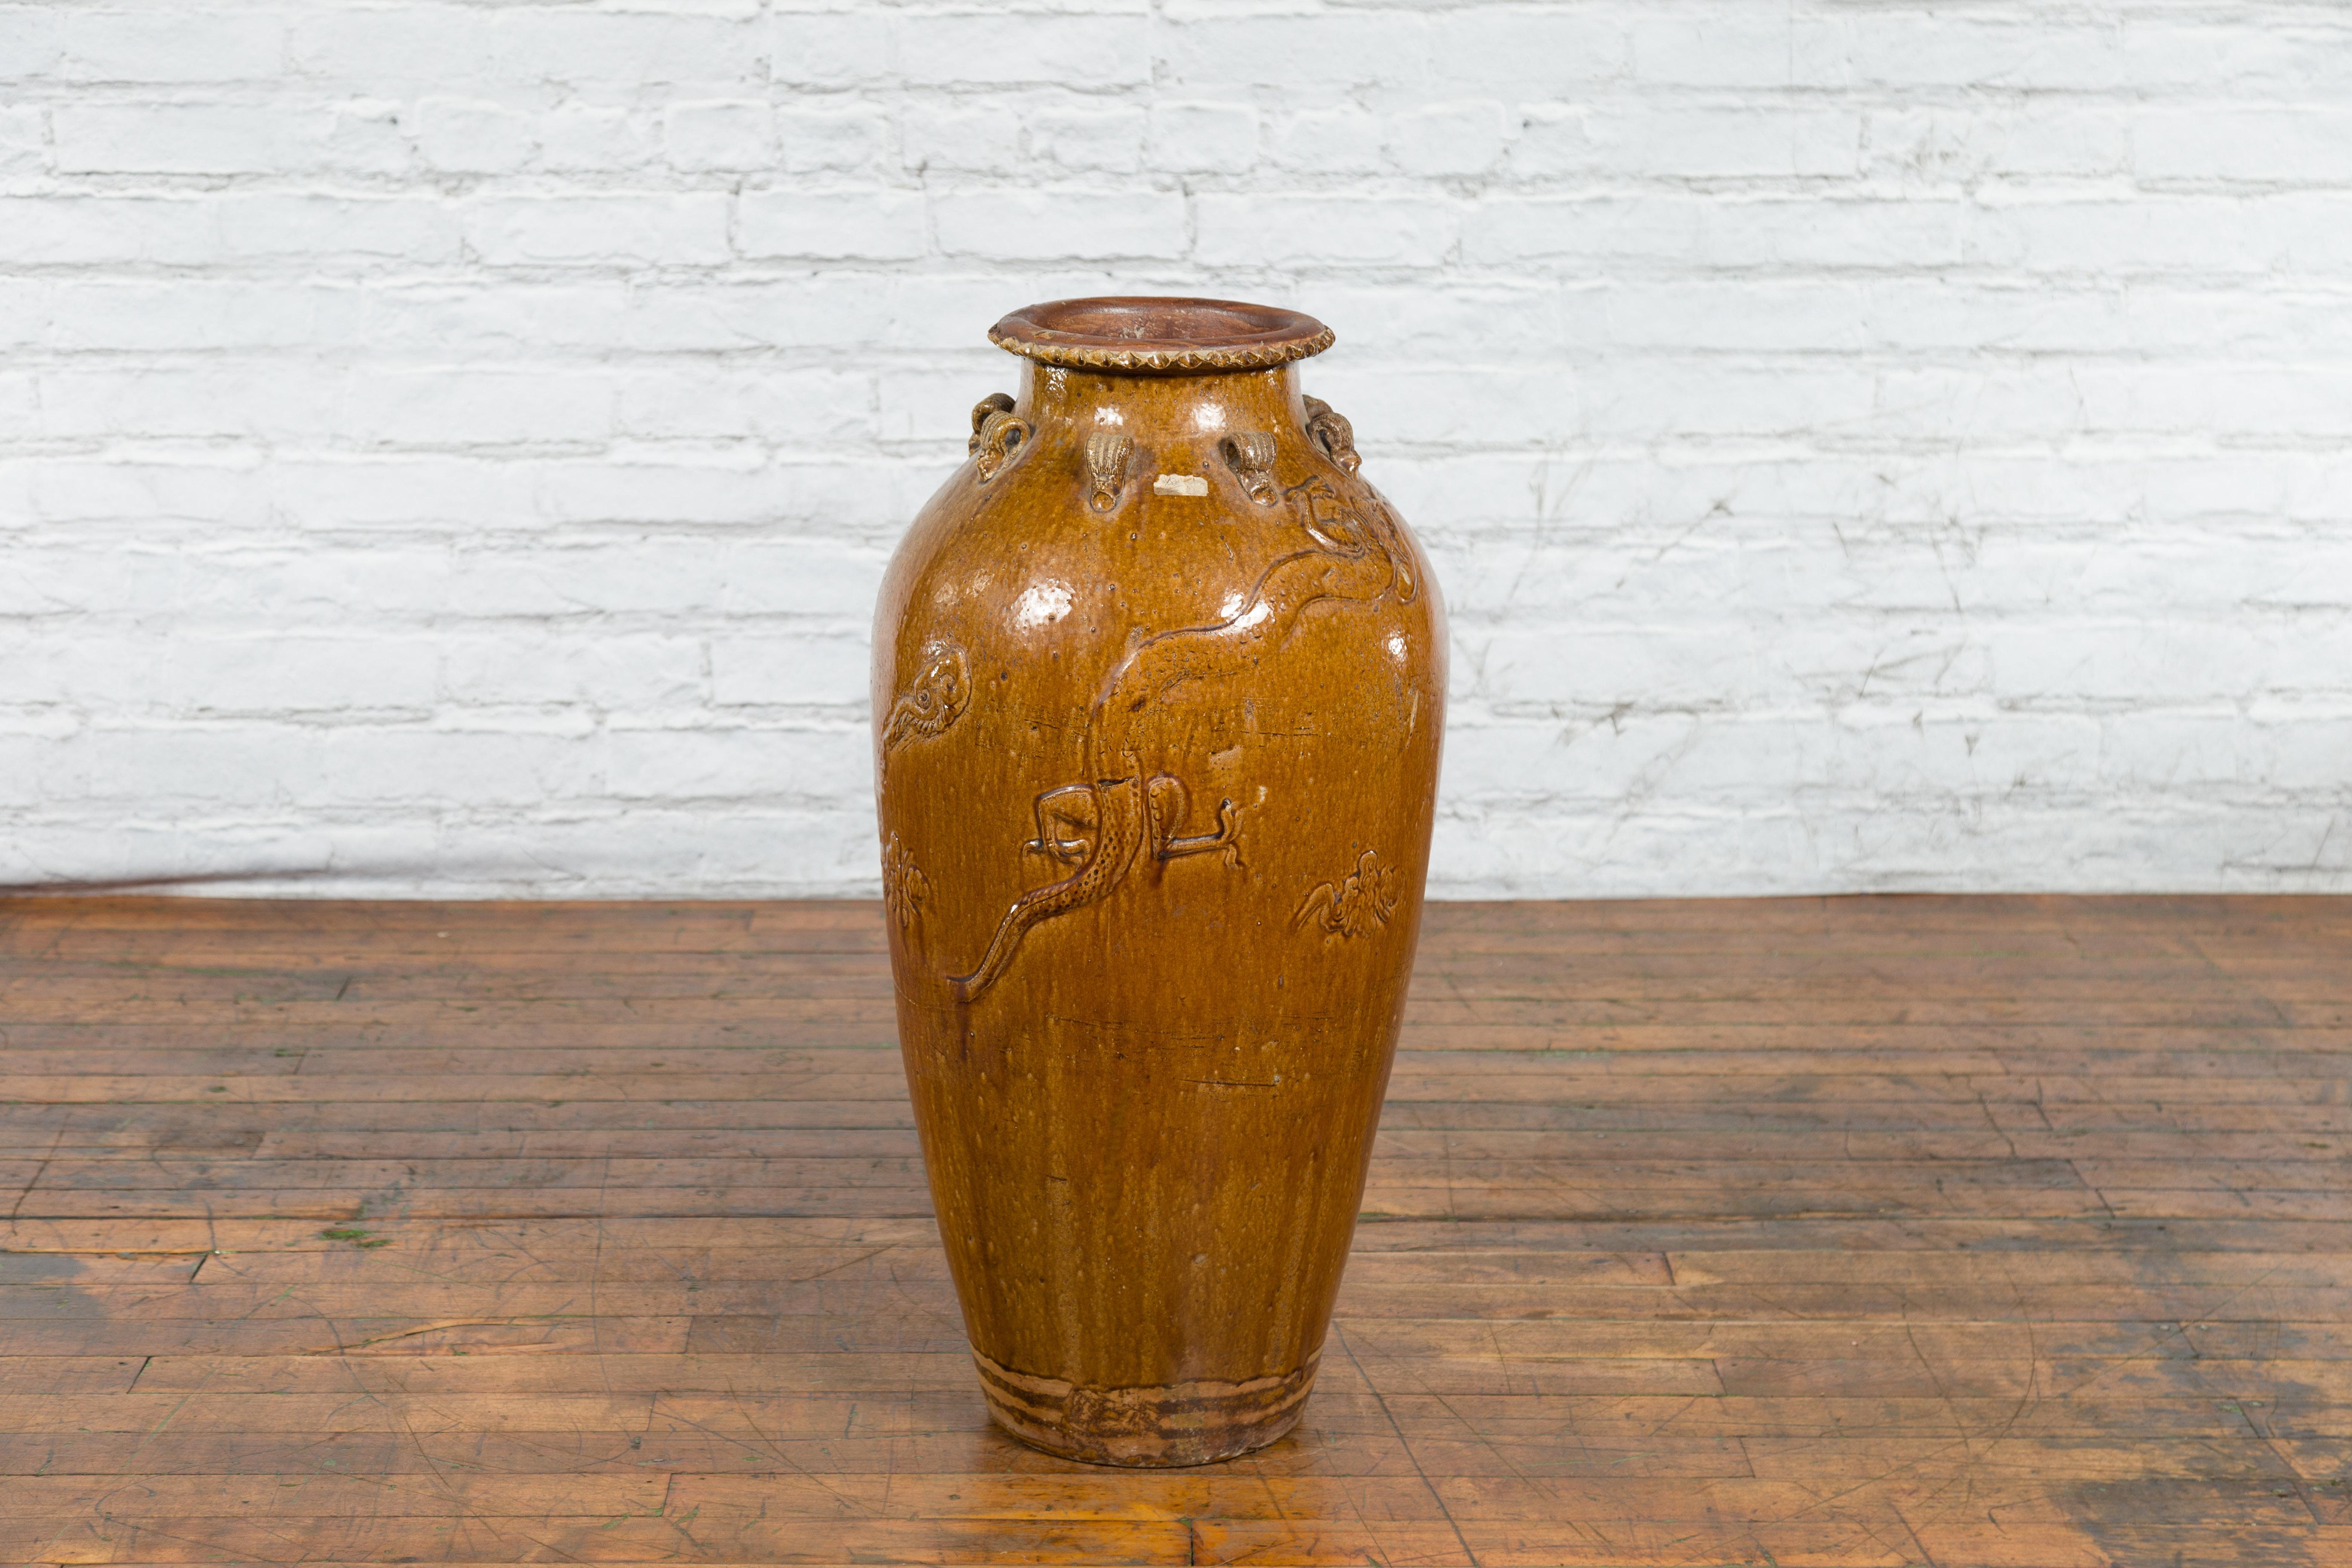 Tall Antique Qing Dynasty Period Martaban Jar from China, 18th-19th Century For Sale 5